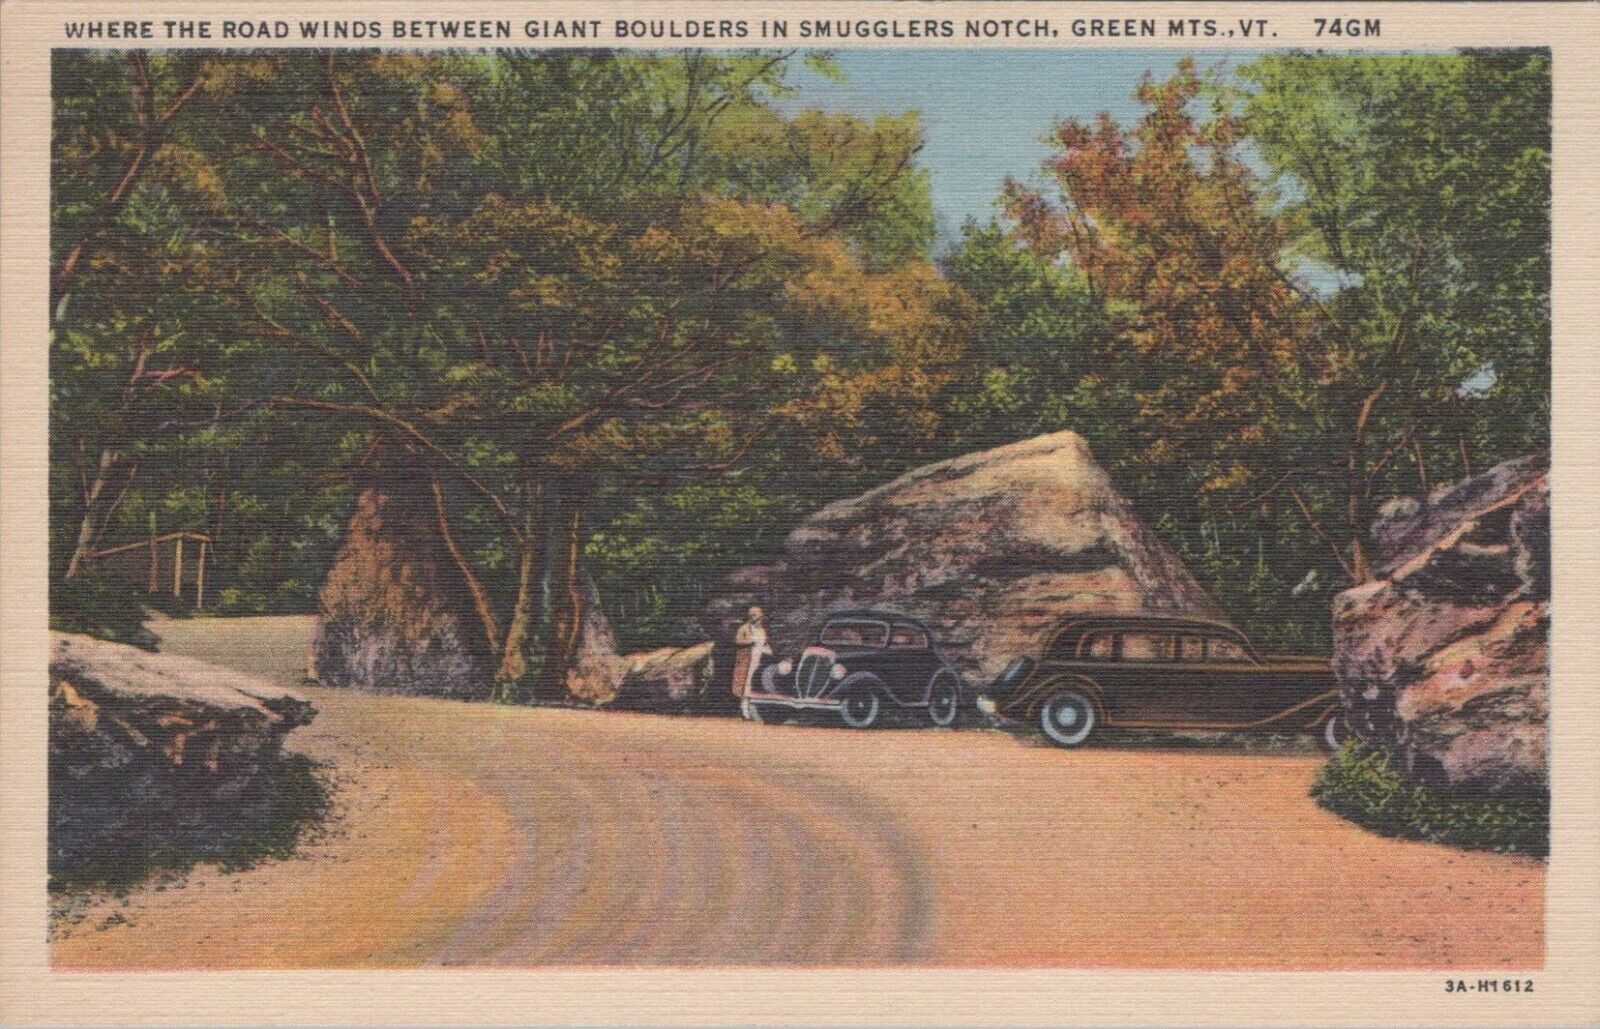 Green Mountains Vermont Smugglers Notch Road Between Giant Boulders Vintage PC